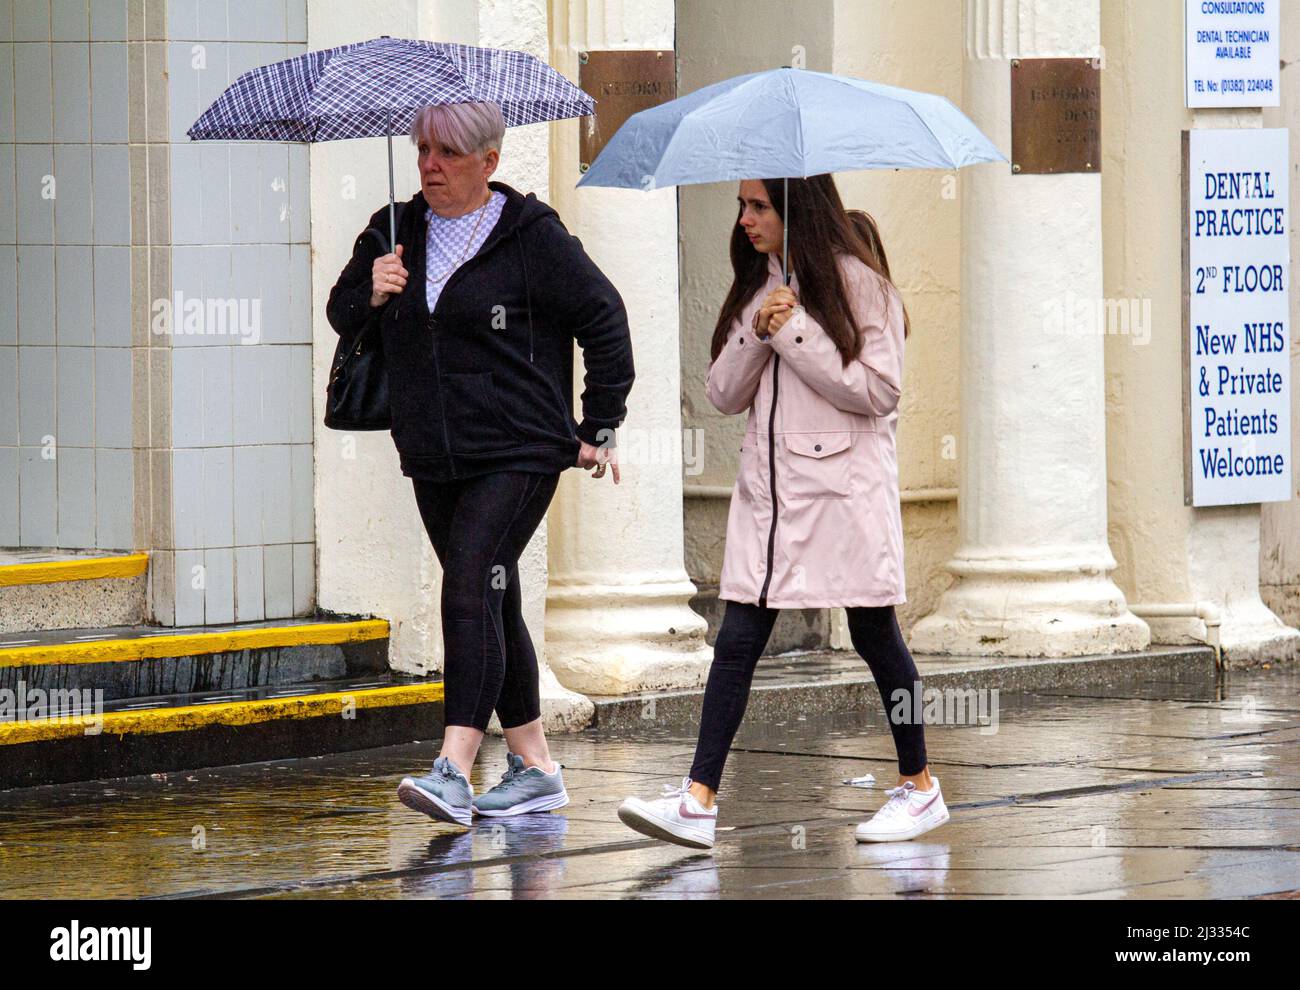 Dundee, Tayside, Scotland, UK. 5th April 2022. UK Weather: Temperatures in Tayside reached 8°C on a dreary and damp day, with heavy rain showers rolling across North East Scotland. The heavy showers haven't stopped locals from socializing and shopping in Dundee city centre for the day. Credit: Dundee Photographics/Alamy Live News Stock Photo